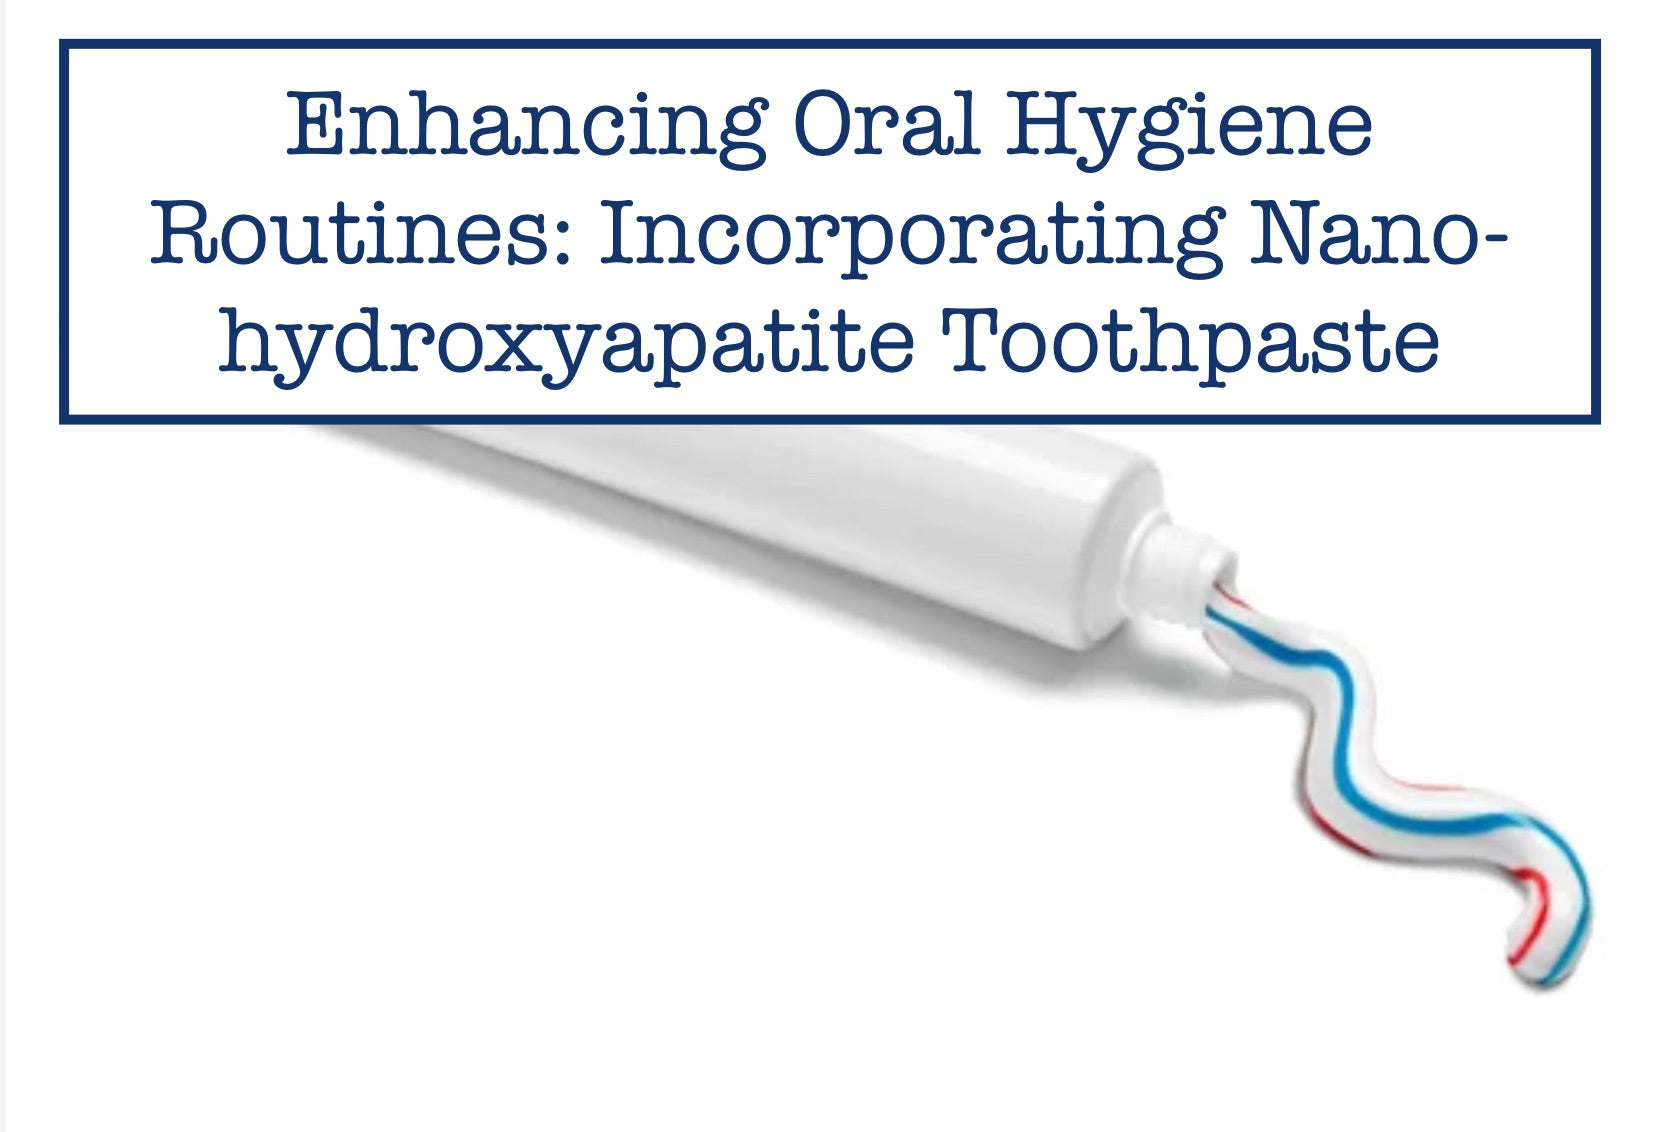 Enhancing Oral Hygiene Routines: Incorporating Nano-hydroxyapatite Toothpaste